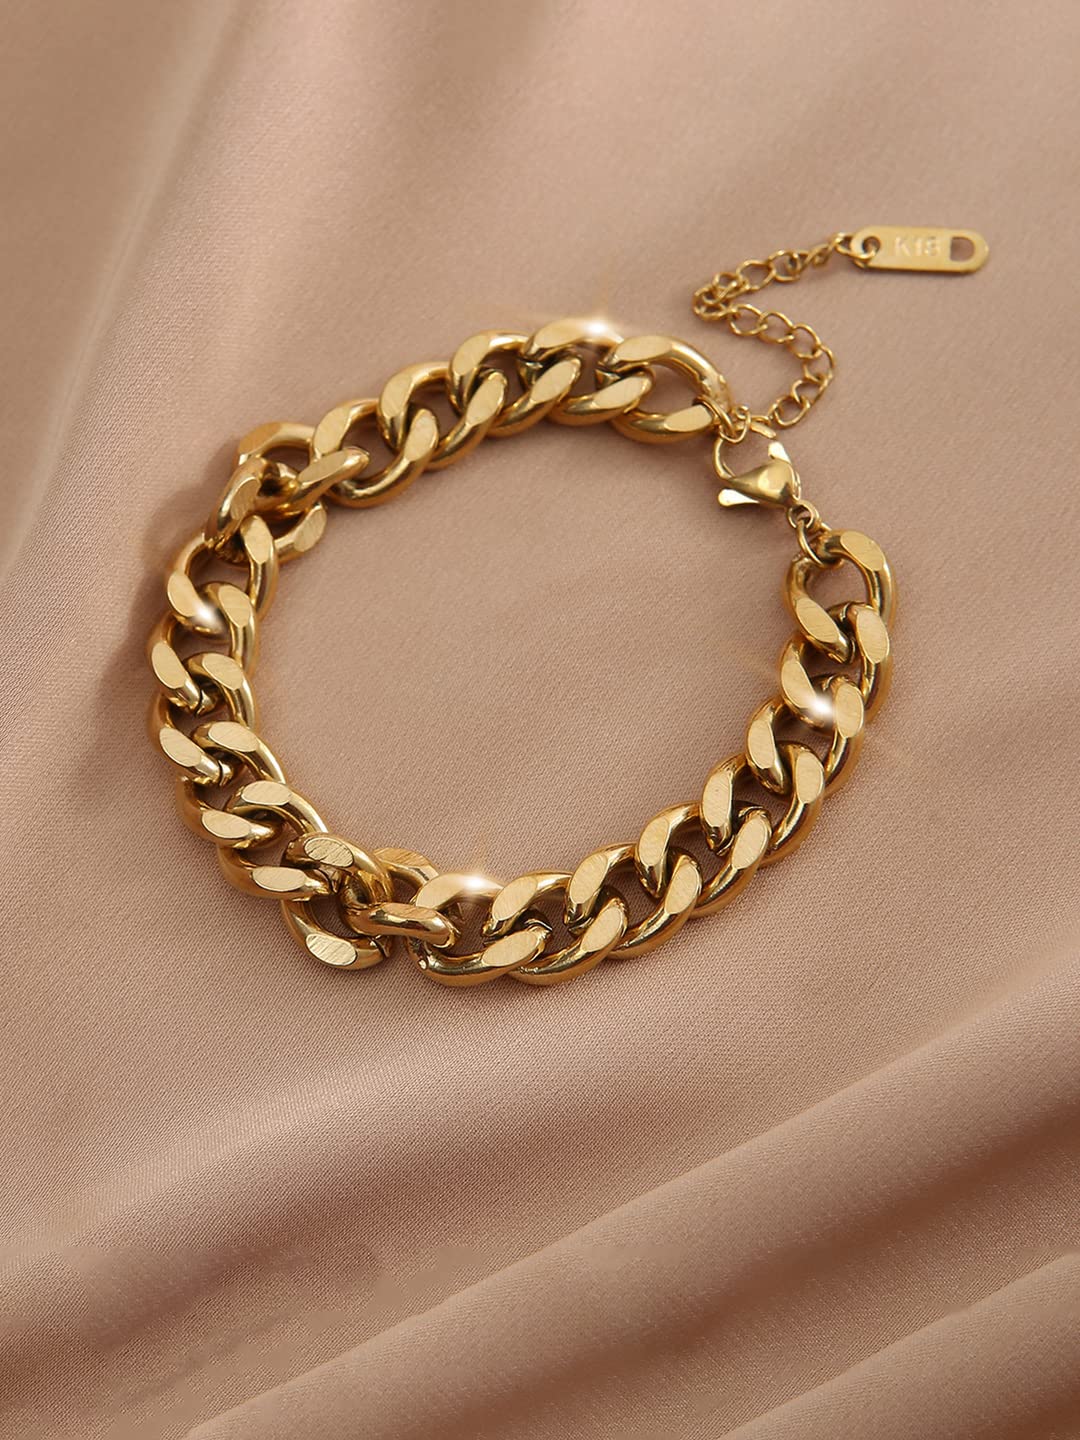 Yellow Chimes Chain Bracelet for Women Gold-Plated Stainless Steel Link Chain Bracelet for Women and Girls